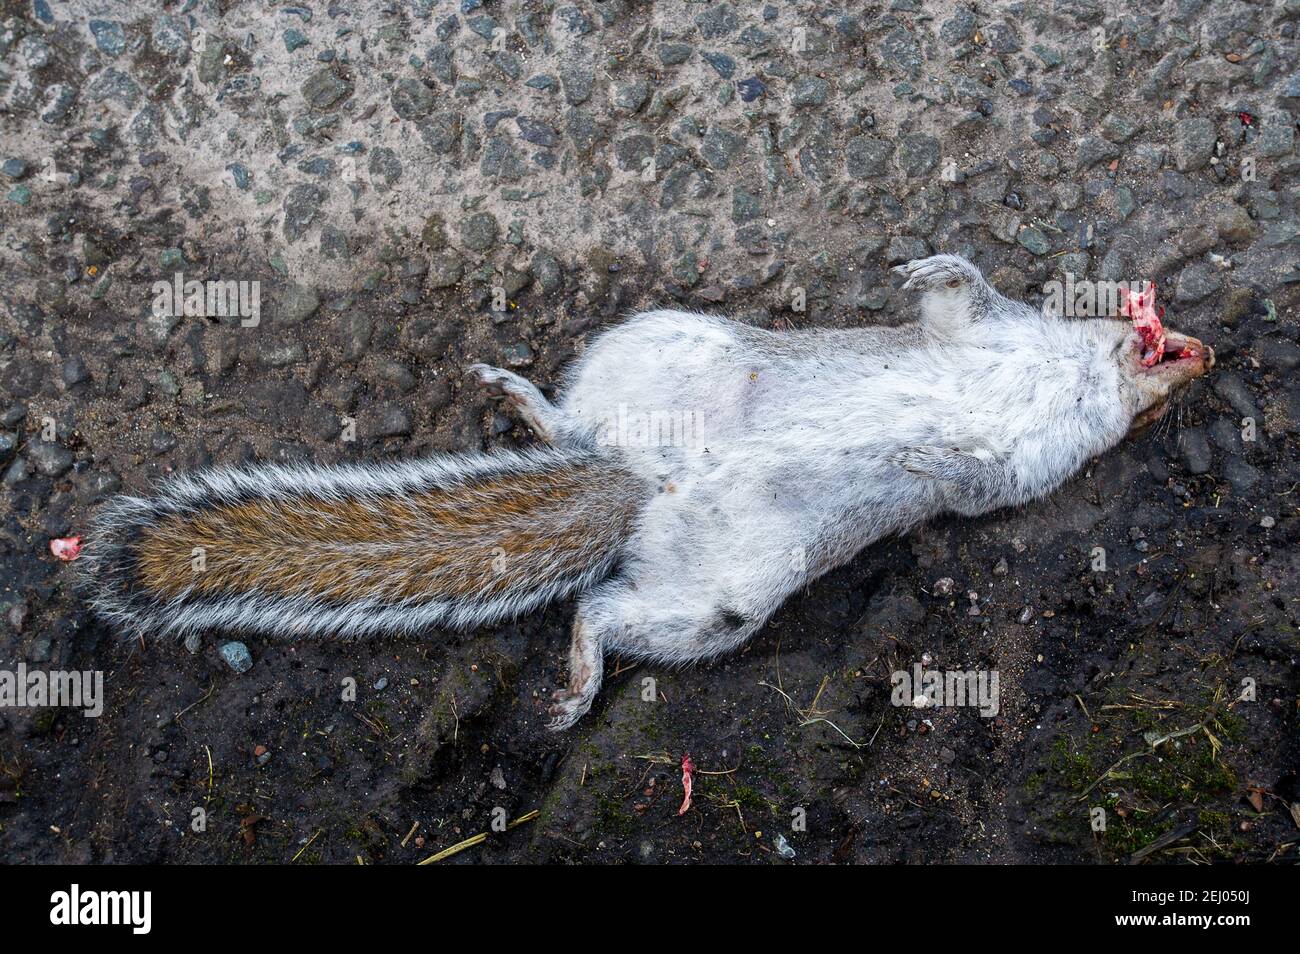 Aylesbury, Buckinghamshire, UK. 20th February, 2021. A dead squirrel on the road near an HS2 compound. Local roads are seeing a huge increase in HS2 contractor HGVs putting wildlife at risk of death. Stop HS2 activists have set up a new camp in the woodlands near it in an attempt to stop HS2 from felling the trees. The number of protesters is growing by the day as people get to see just how destructive the High Speed Rail from London to Birmingham is to the environment. Credit: Maureen McLean/Alamy Live News Stock Photo